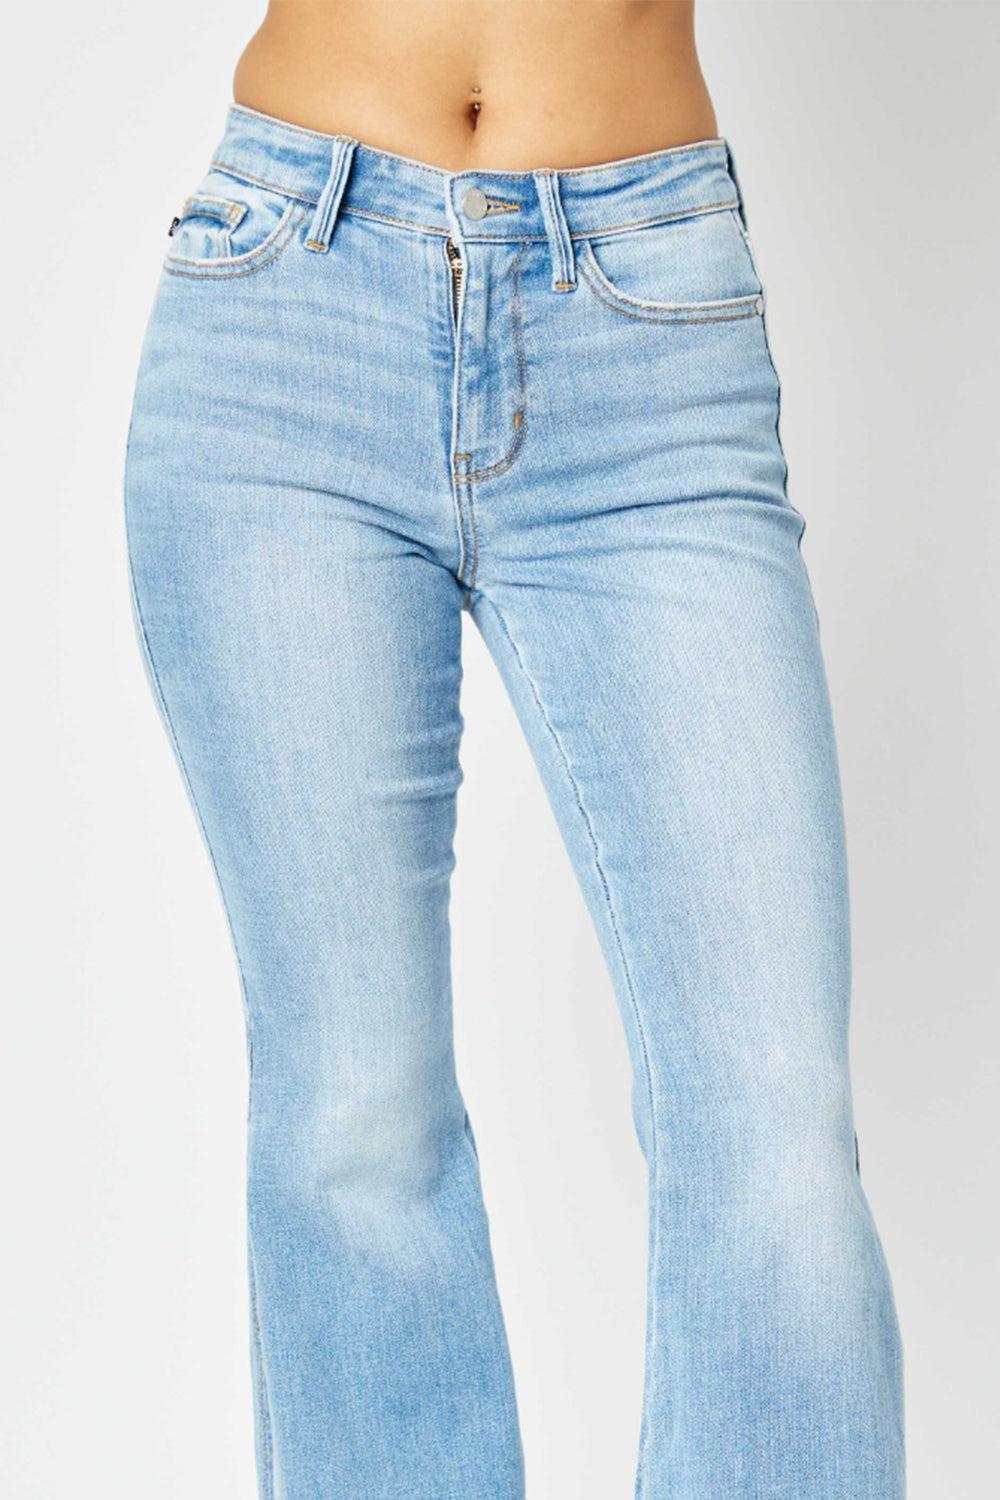 a woman is wearing a pair of blue jeans